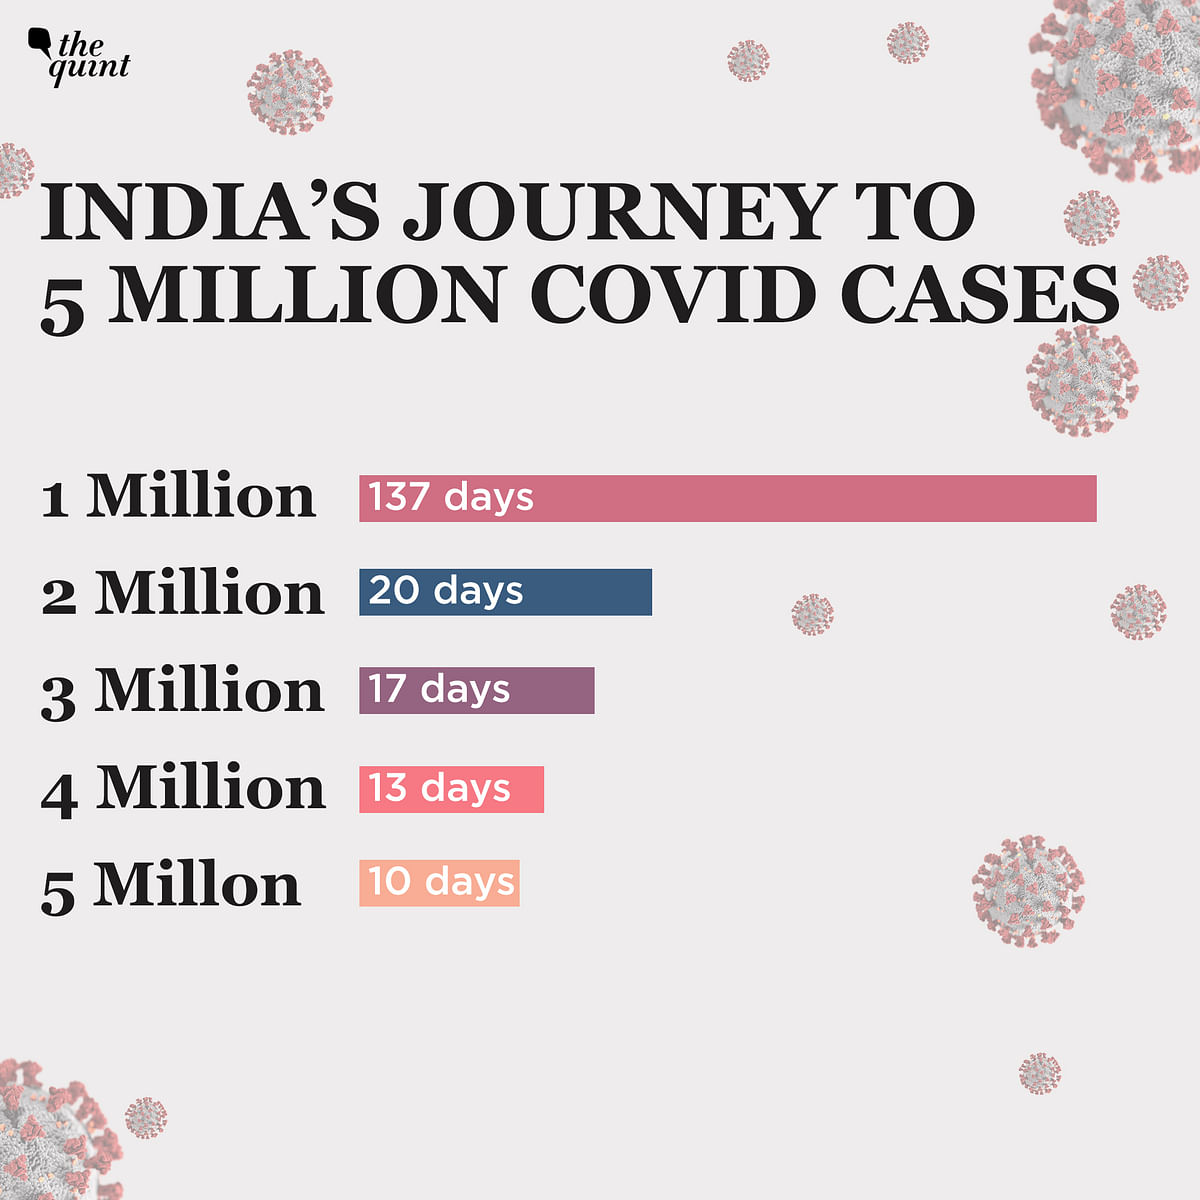 We deep dive into the data to understand how India lost so many lives